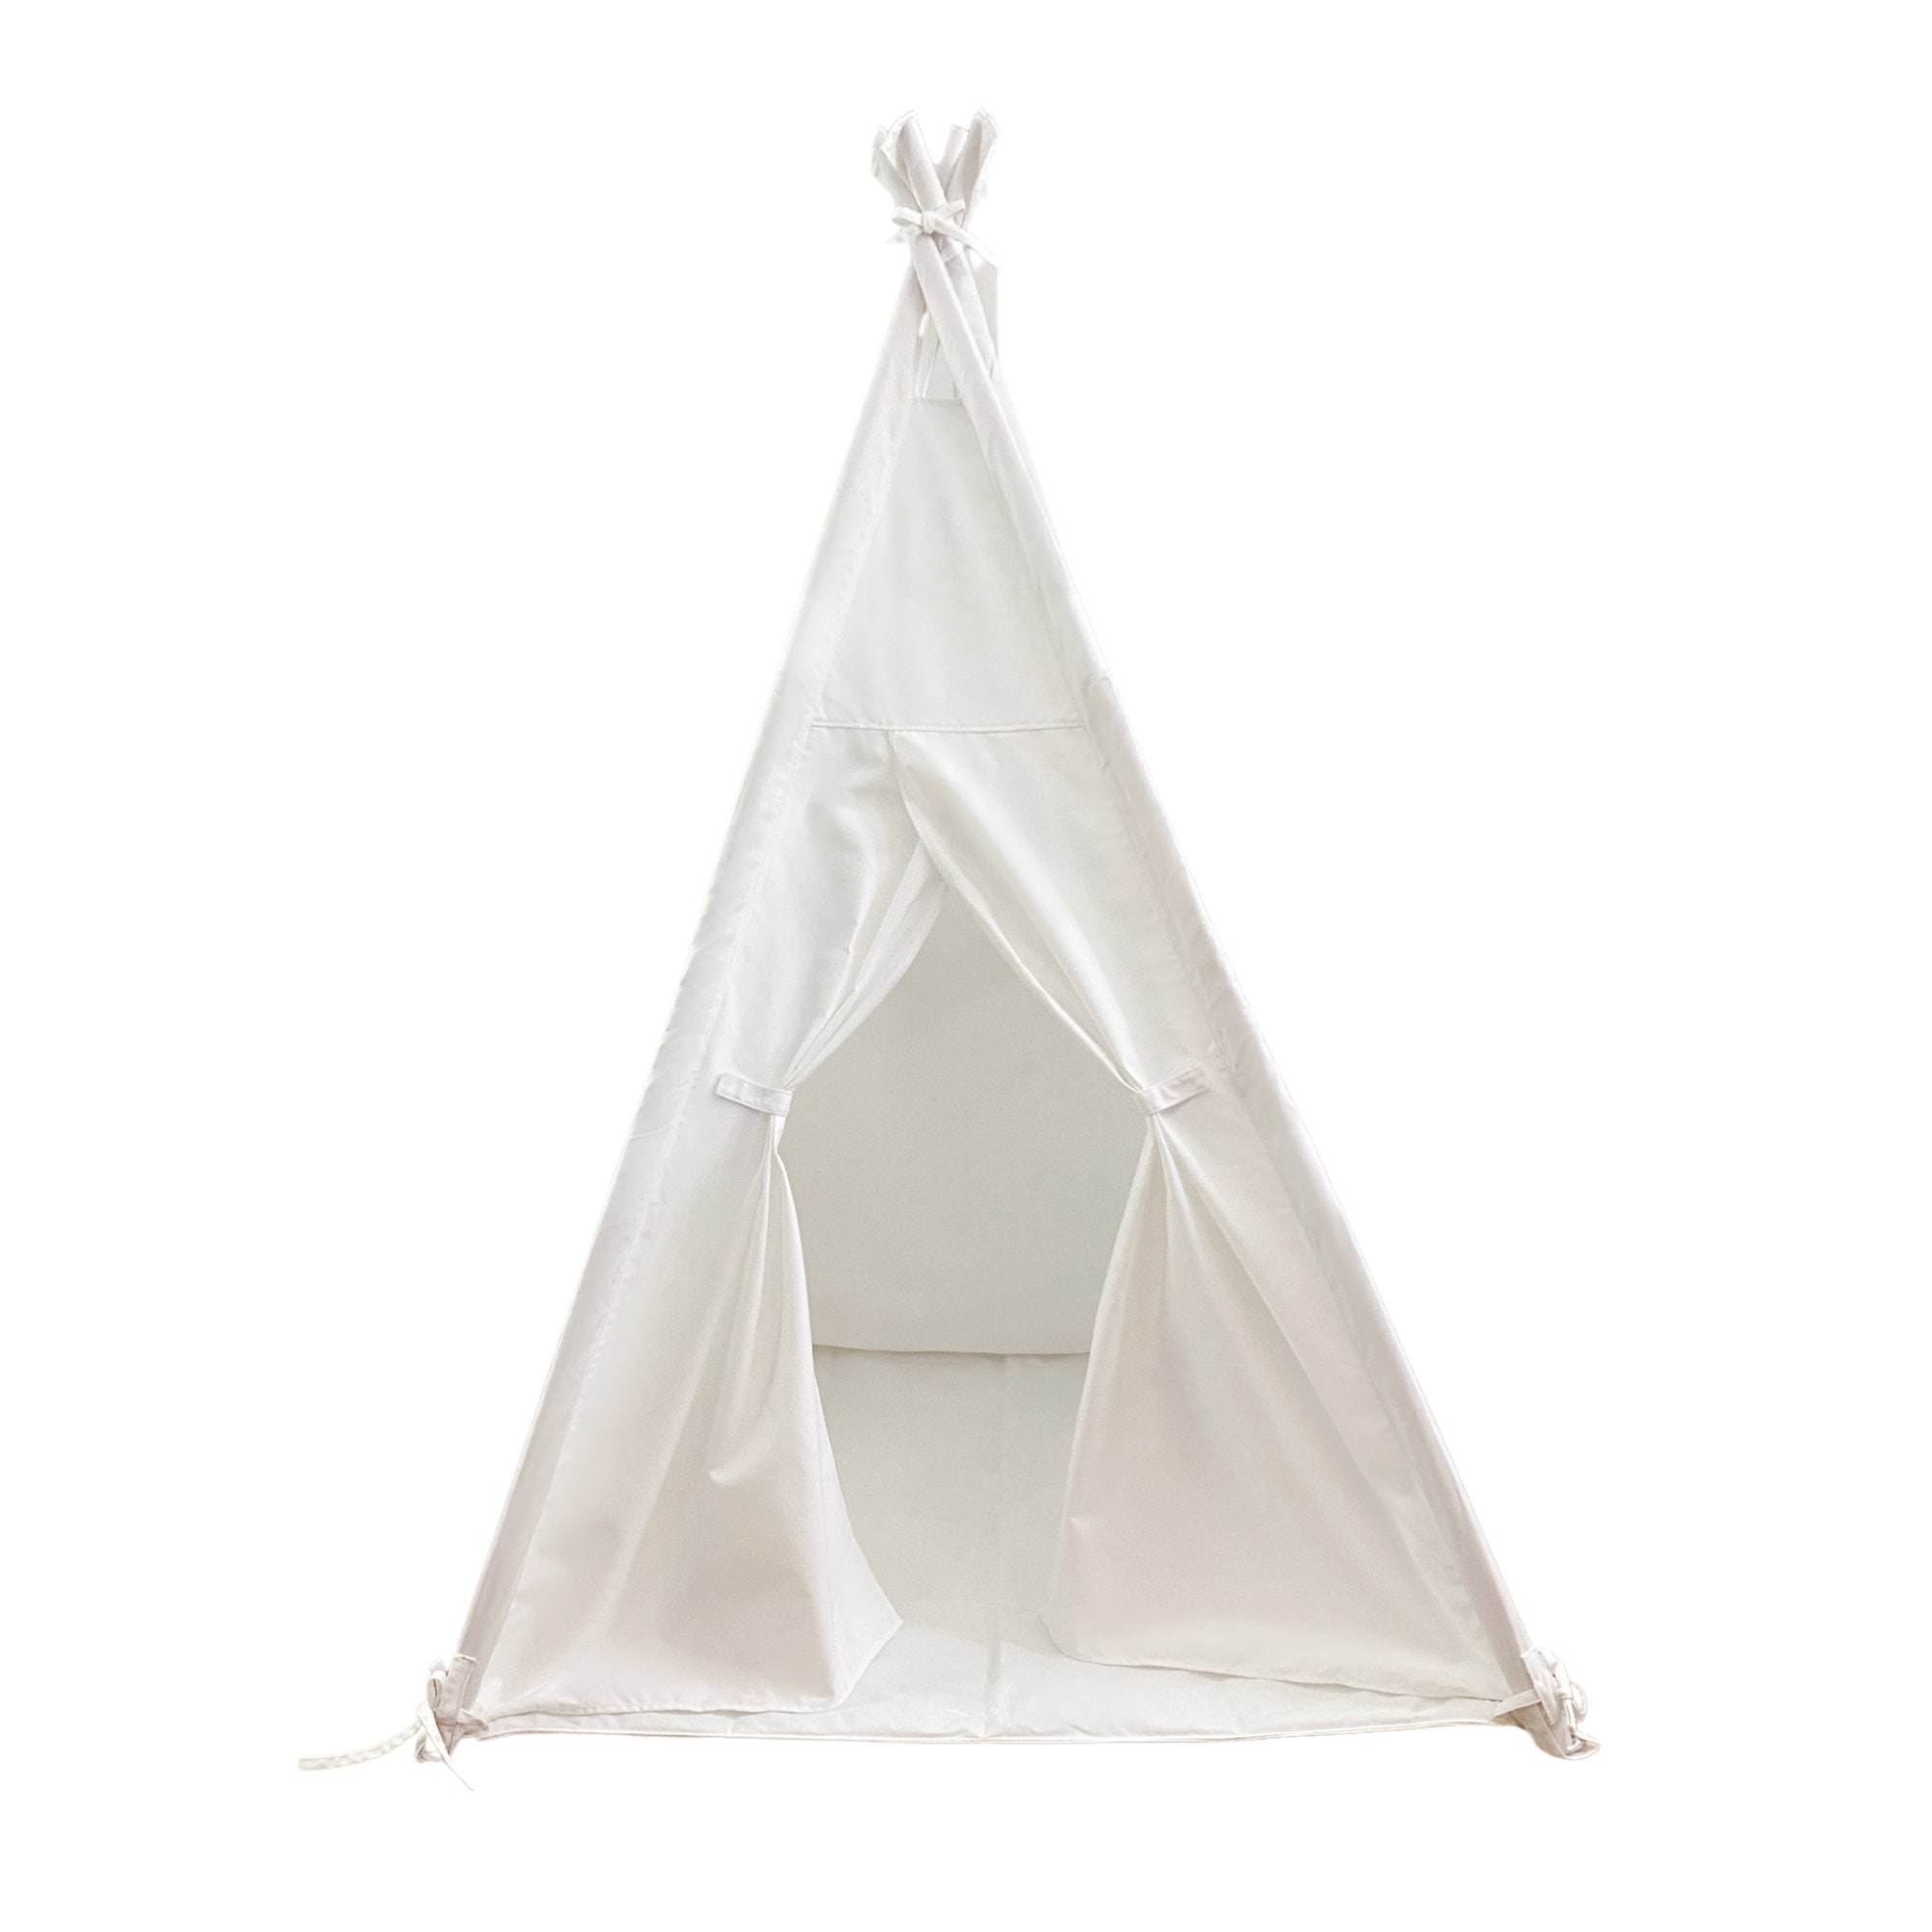 Kids Teepee Tent Children Play Tent 5 ft Raw White Cotton Canvas Four Wooden Poles Thick Cushion Mat LED Light Banner Carry Case Indoor Outdoor Playhouse for Girls and Boys Childrens Room Decor 